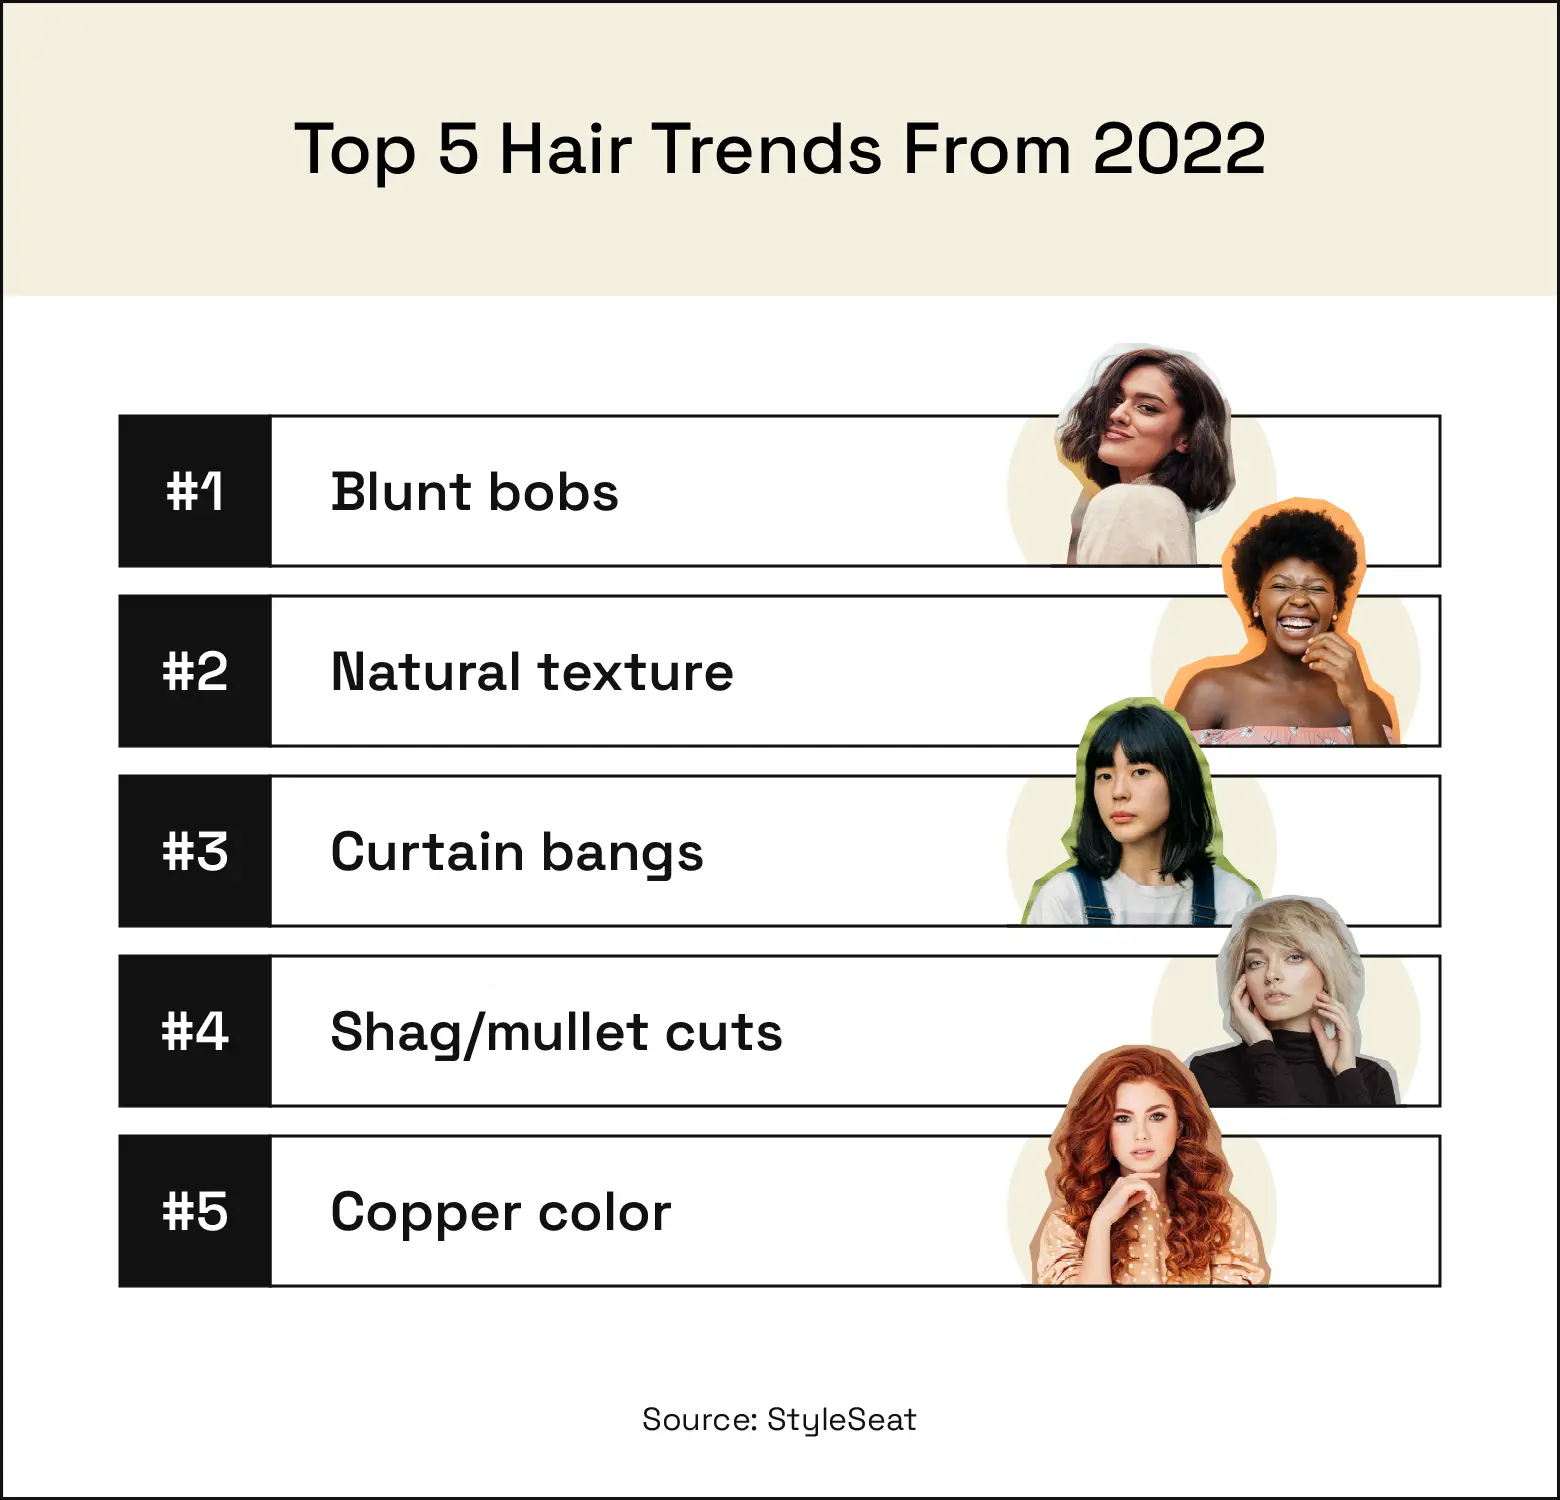 The top five hair trends from 2022 are blunt bobs, natural texture, curtain bangs, shags/mullet cuts, and copper color.